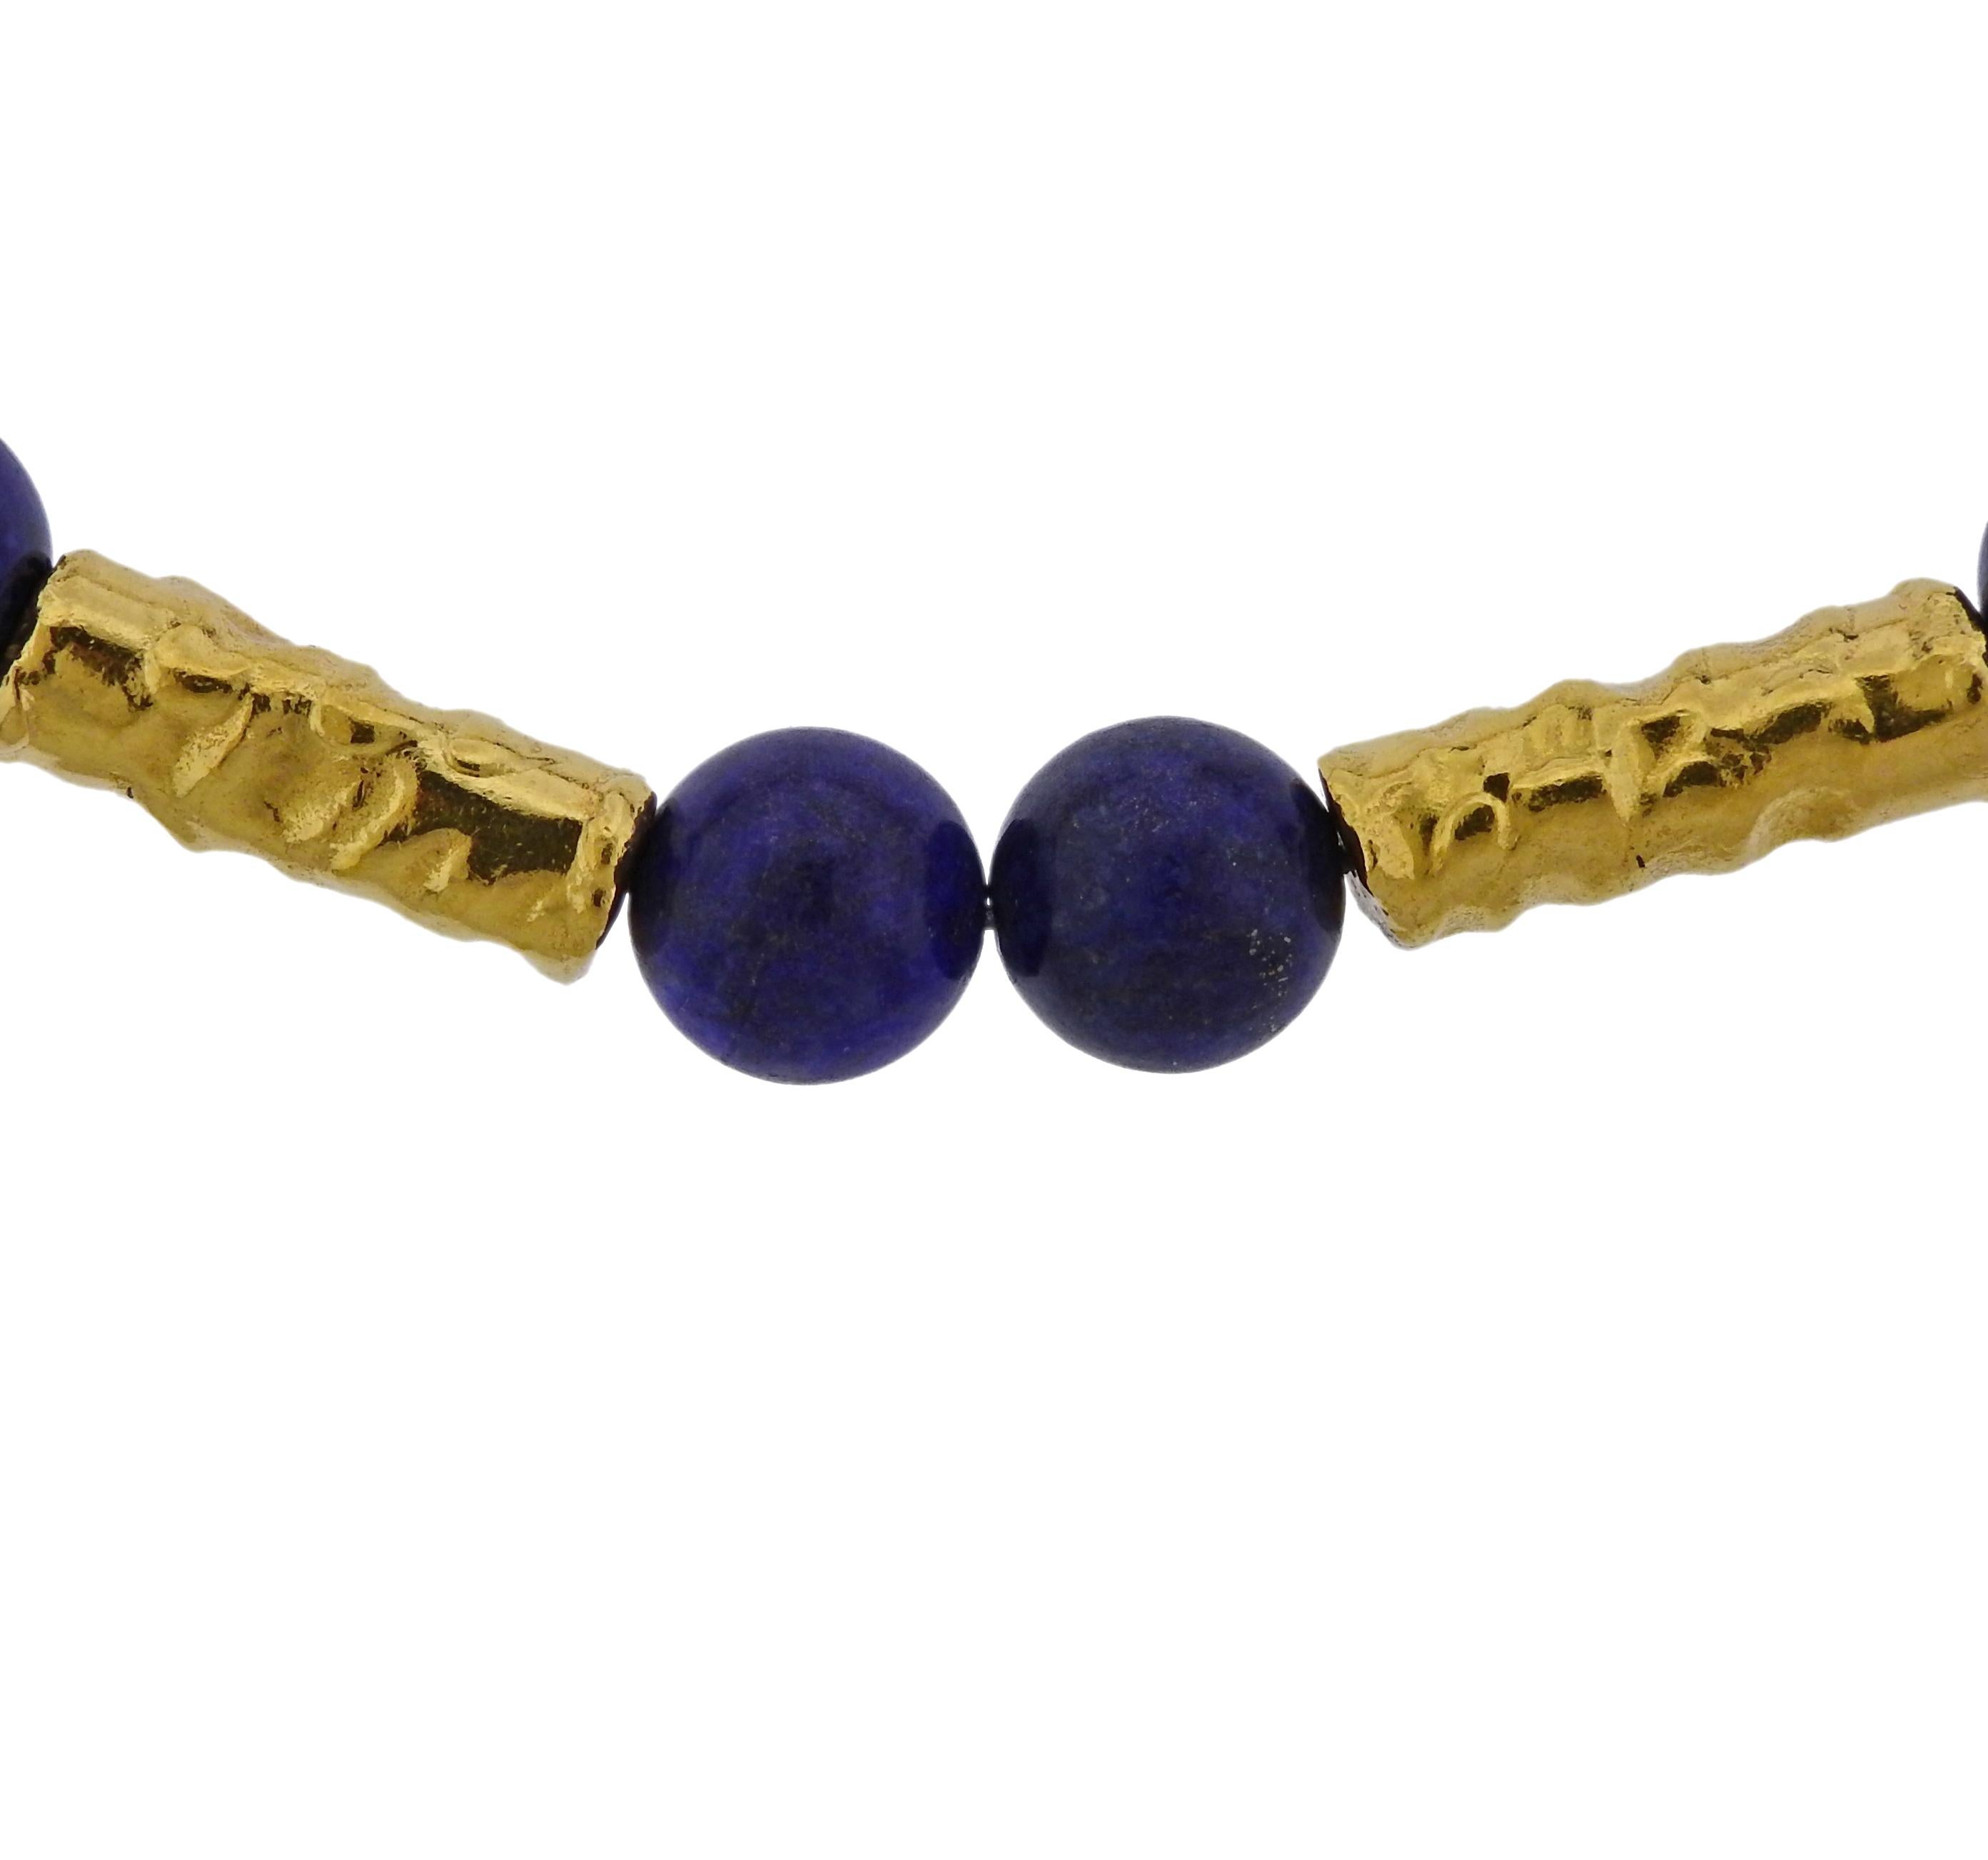 22k gold link necklace, crafted bu Jean Mahie, decorated with 12mm lapis beads.  Necklace is 14